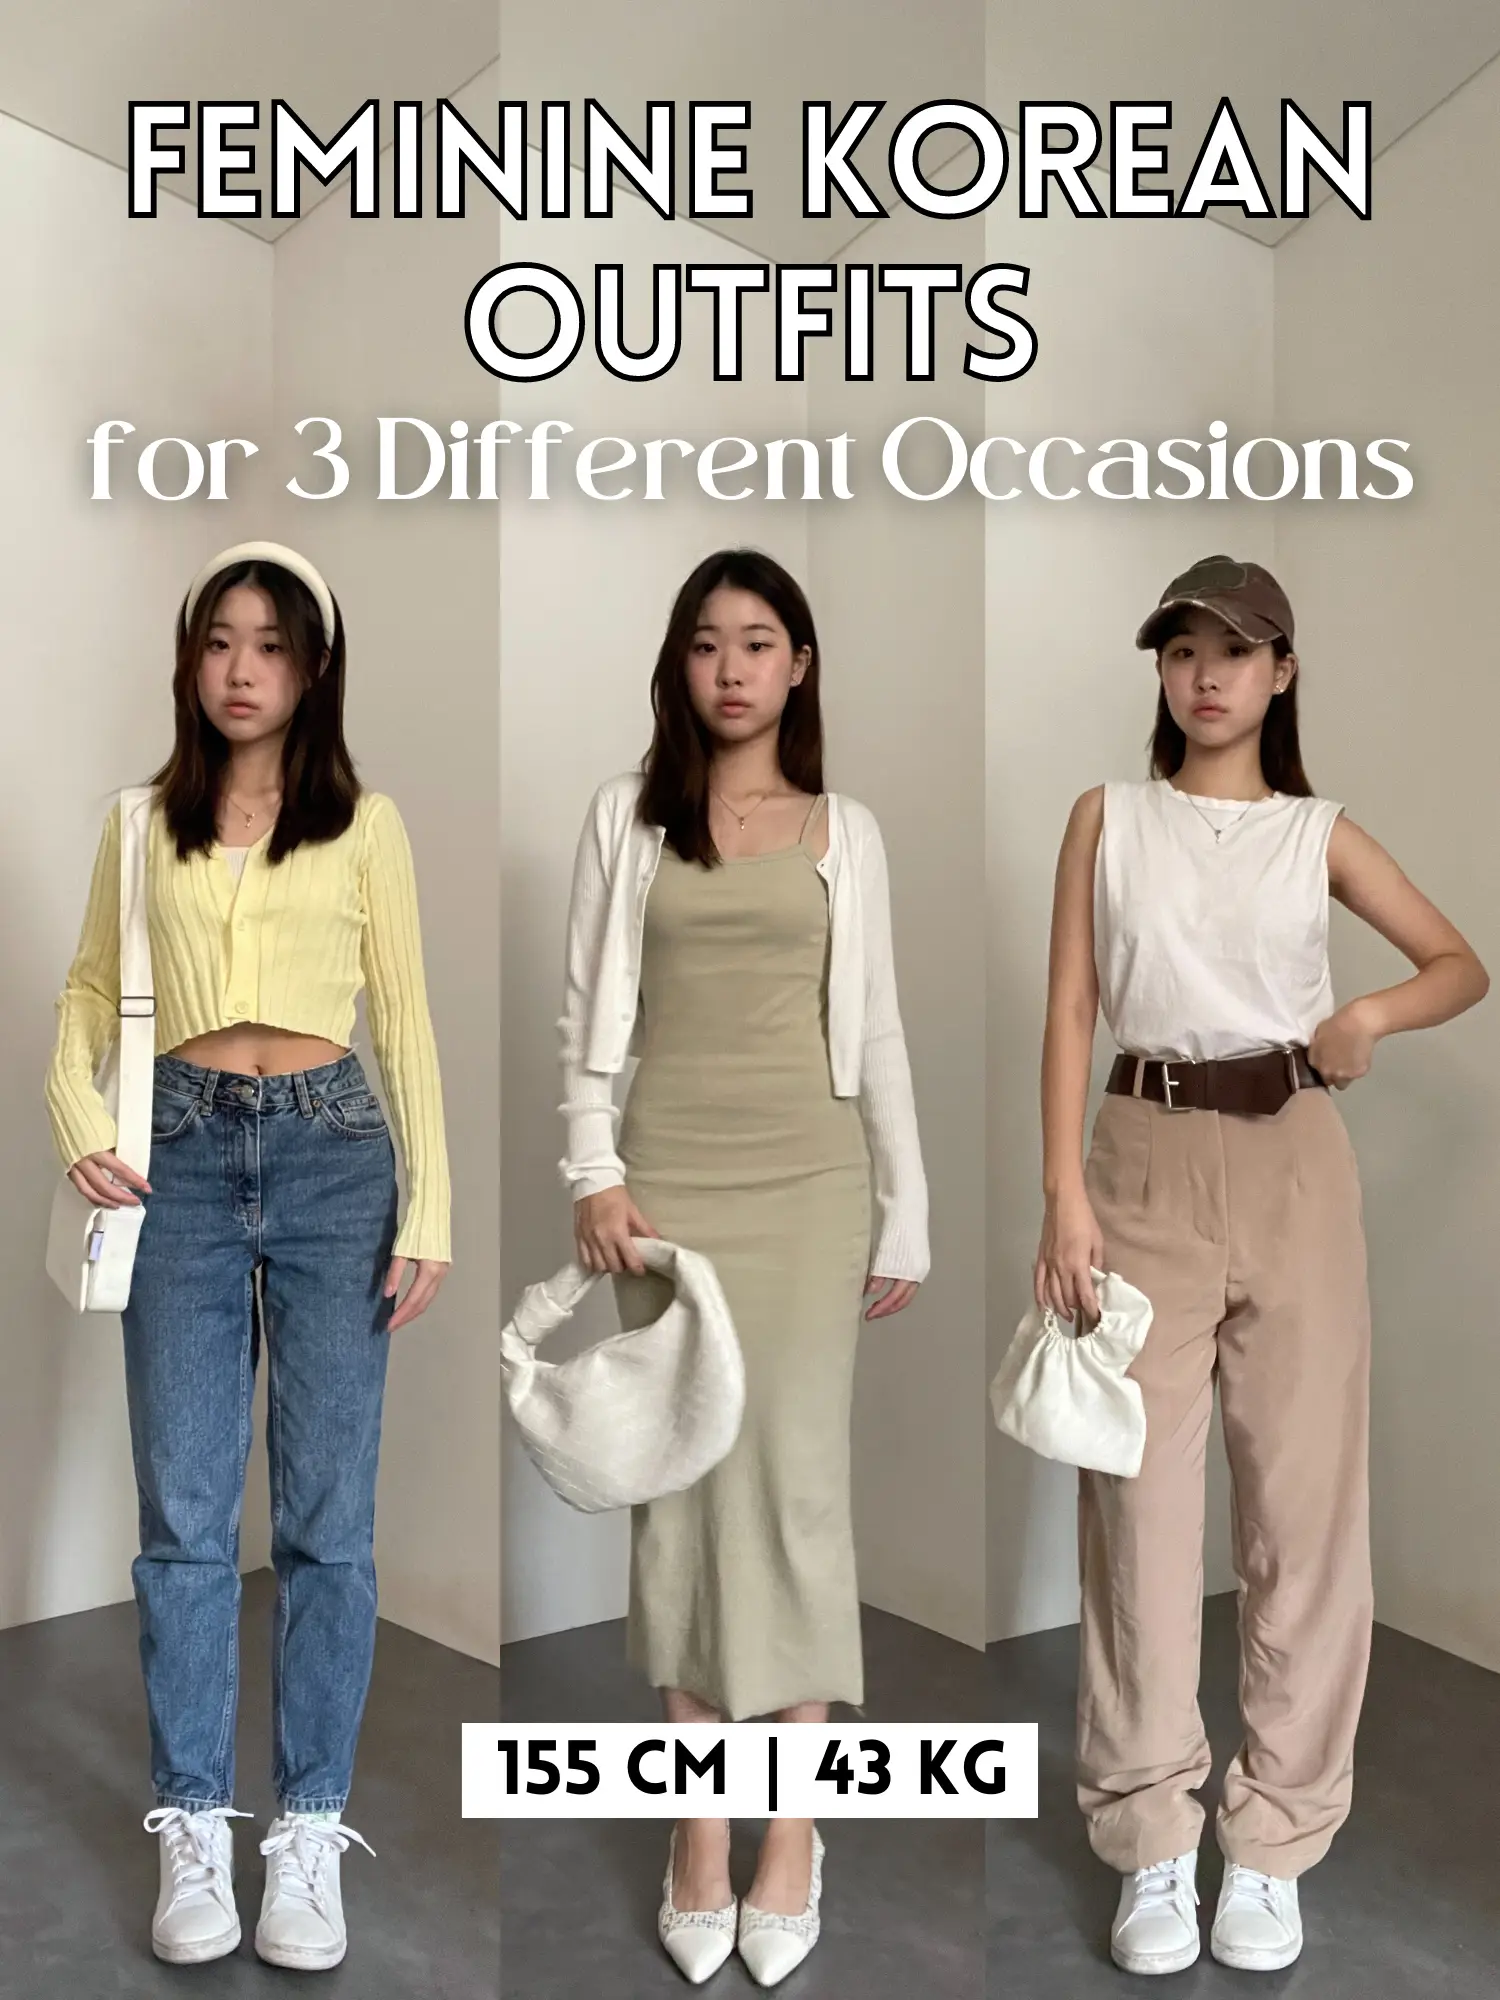 ✨FEMININE KOREAN OUTFITS✨ FOR 3 OCCASIONS🤩🎀's images